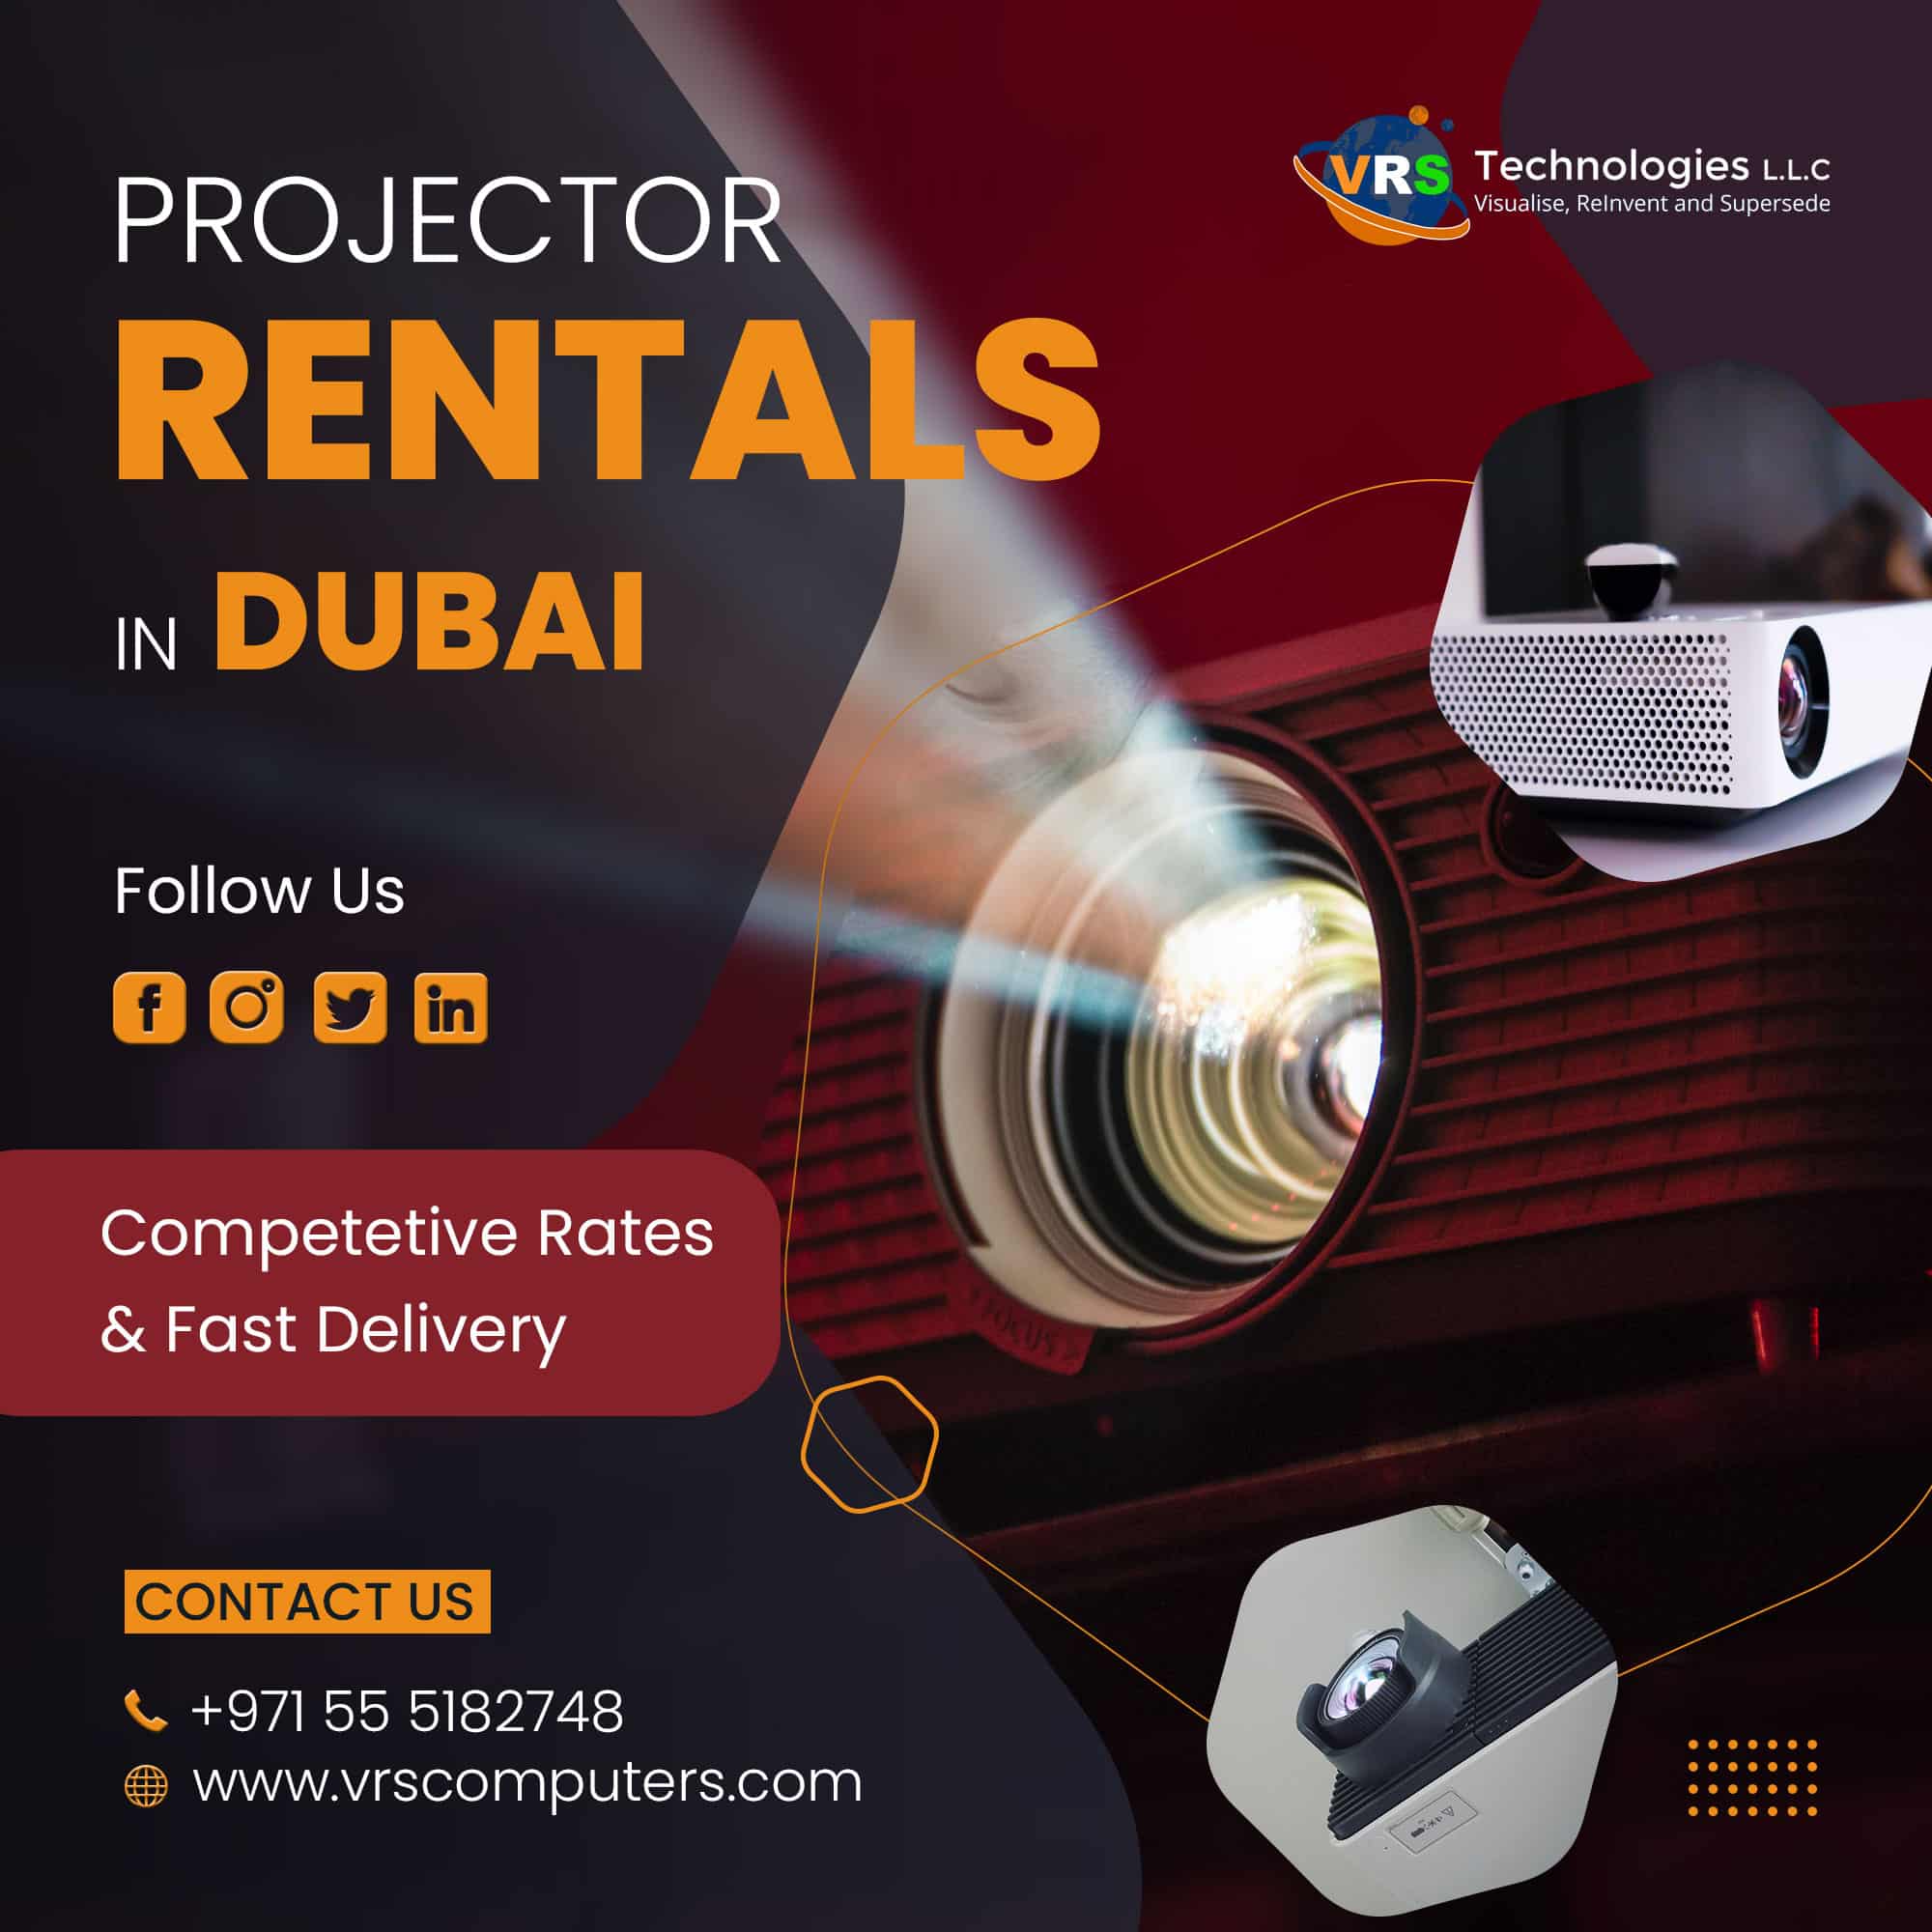 Best Ways To Effectively Use Projectors Rentals In Dubai